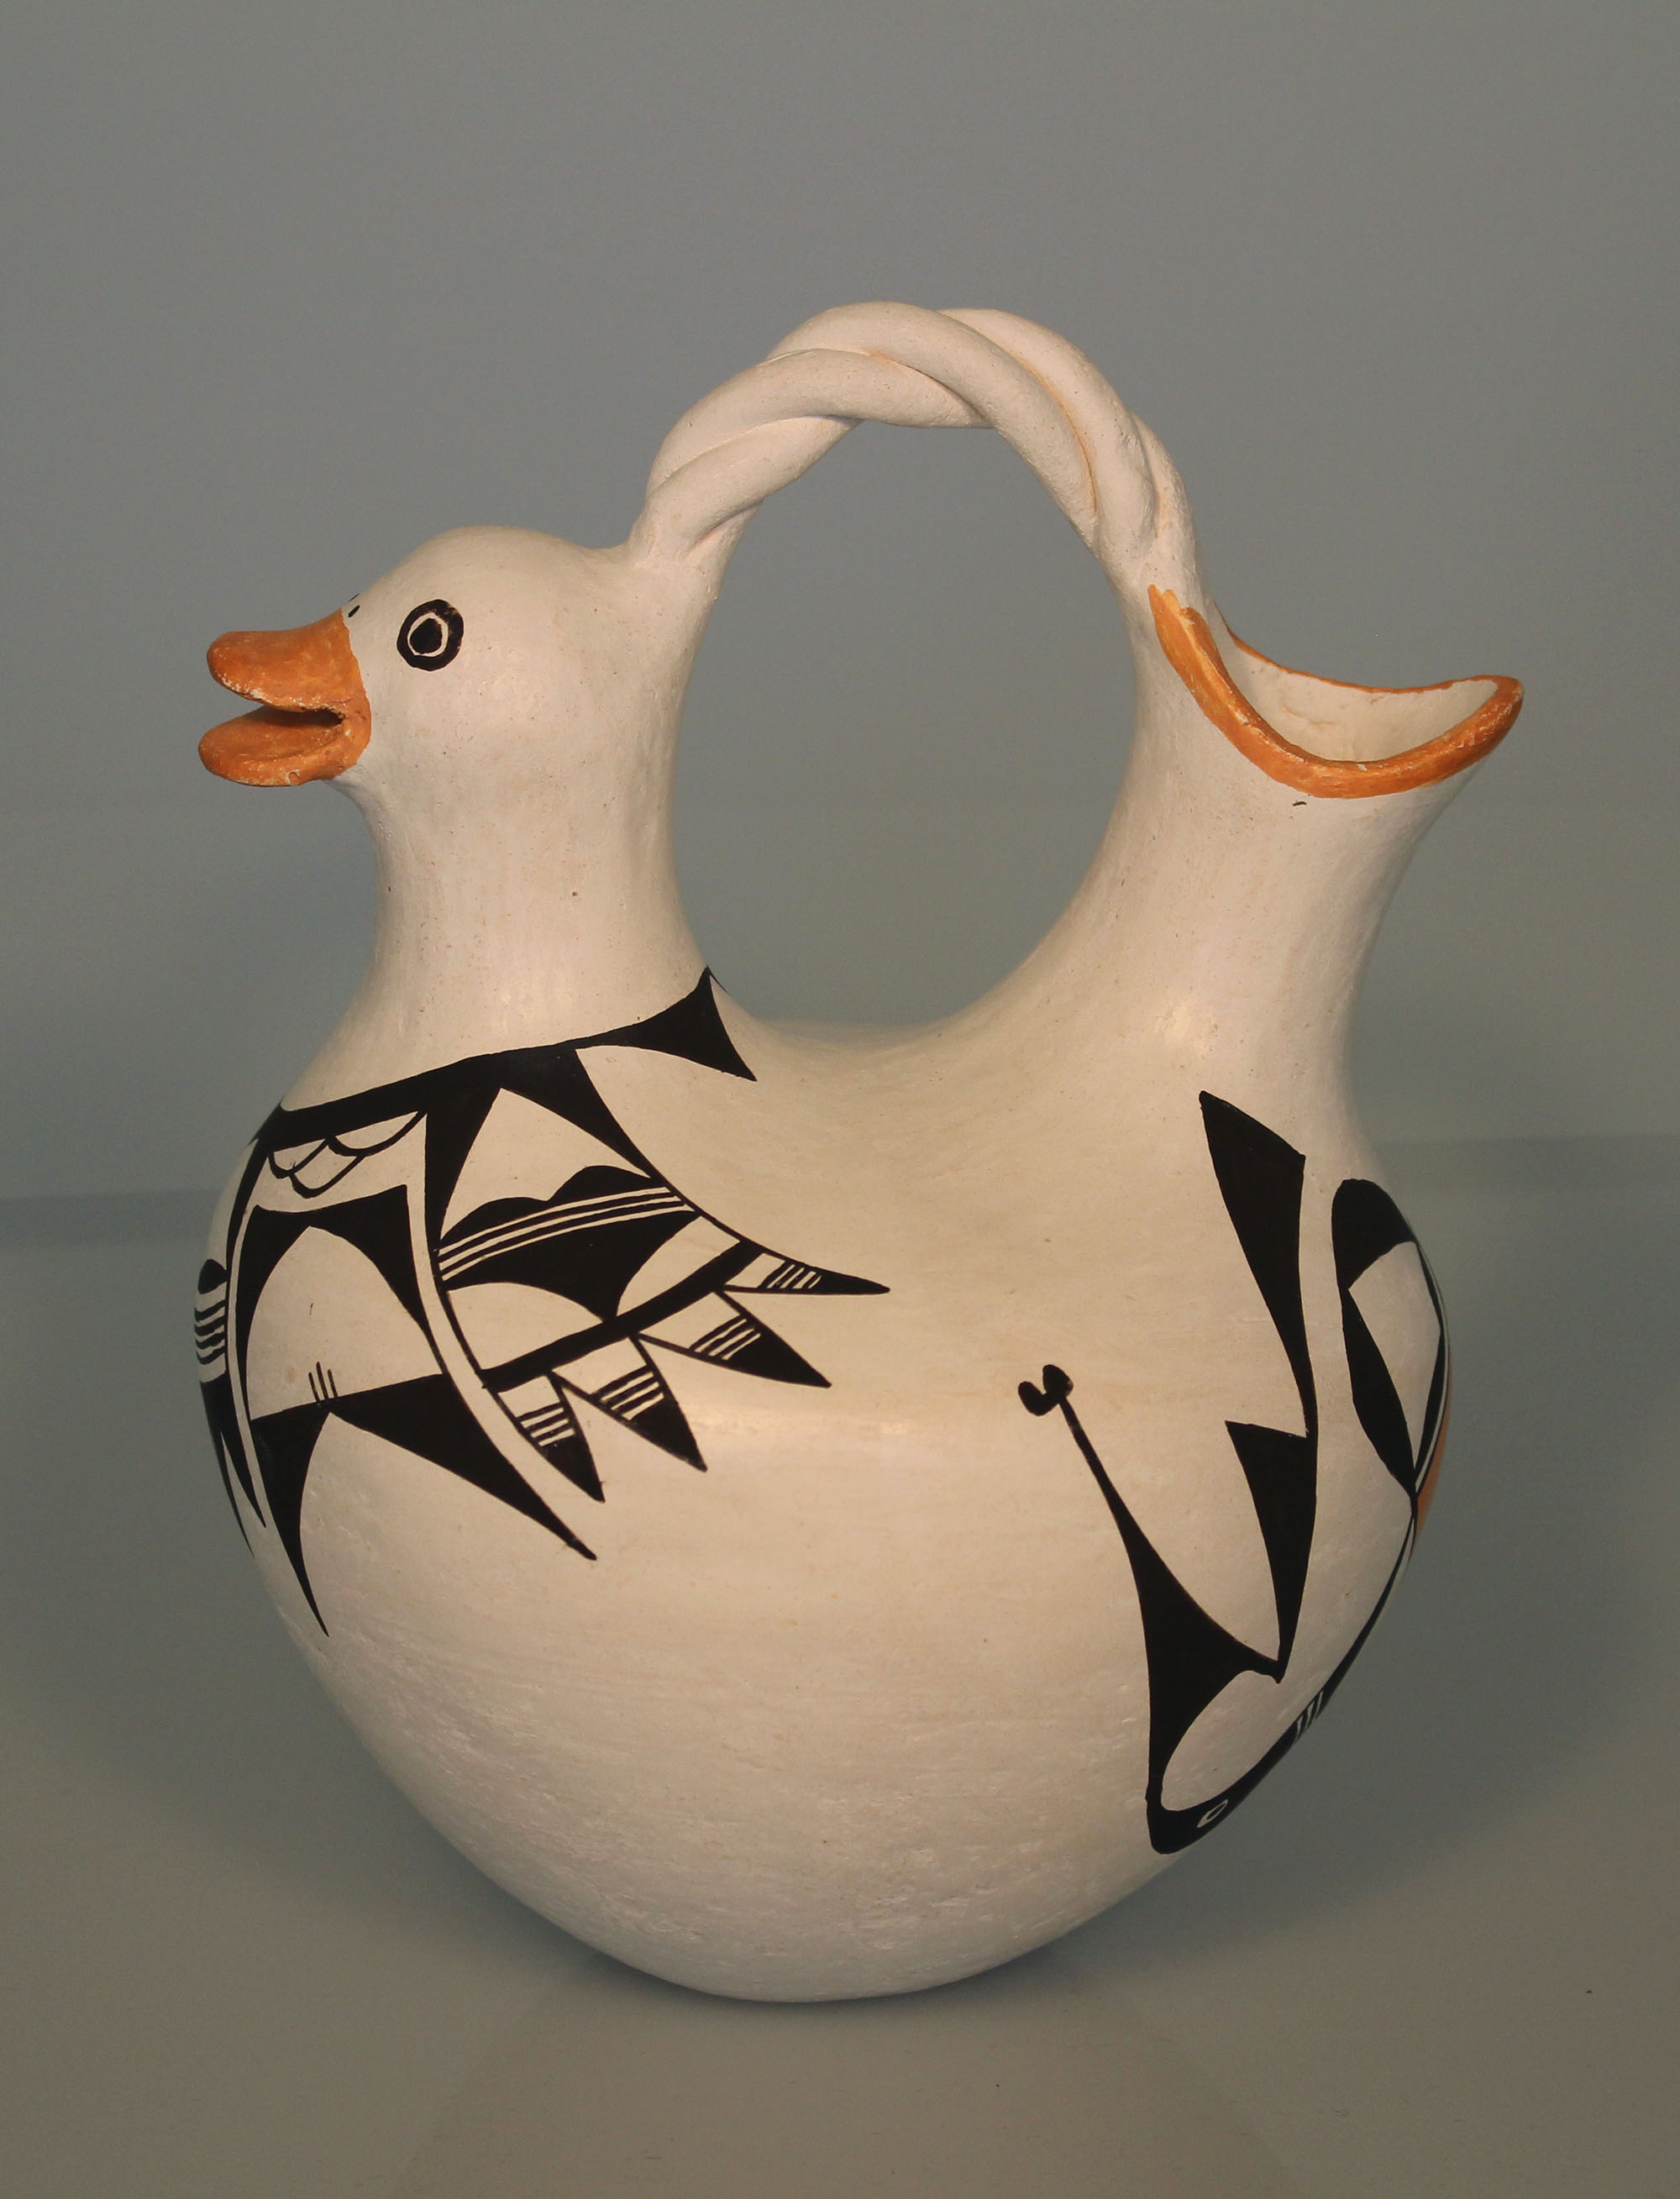 Wedding vase with chicken head by Lucy Lewis, white with geometric black and orange designs.